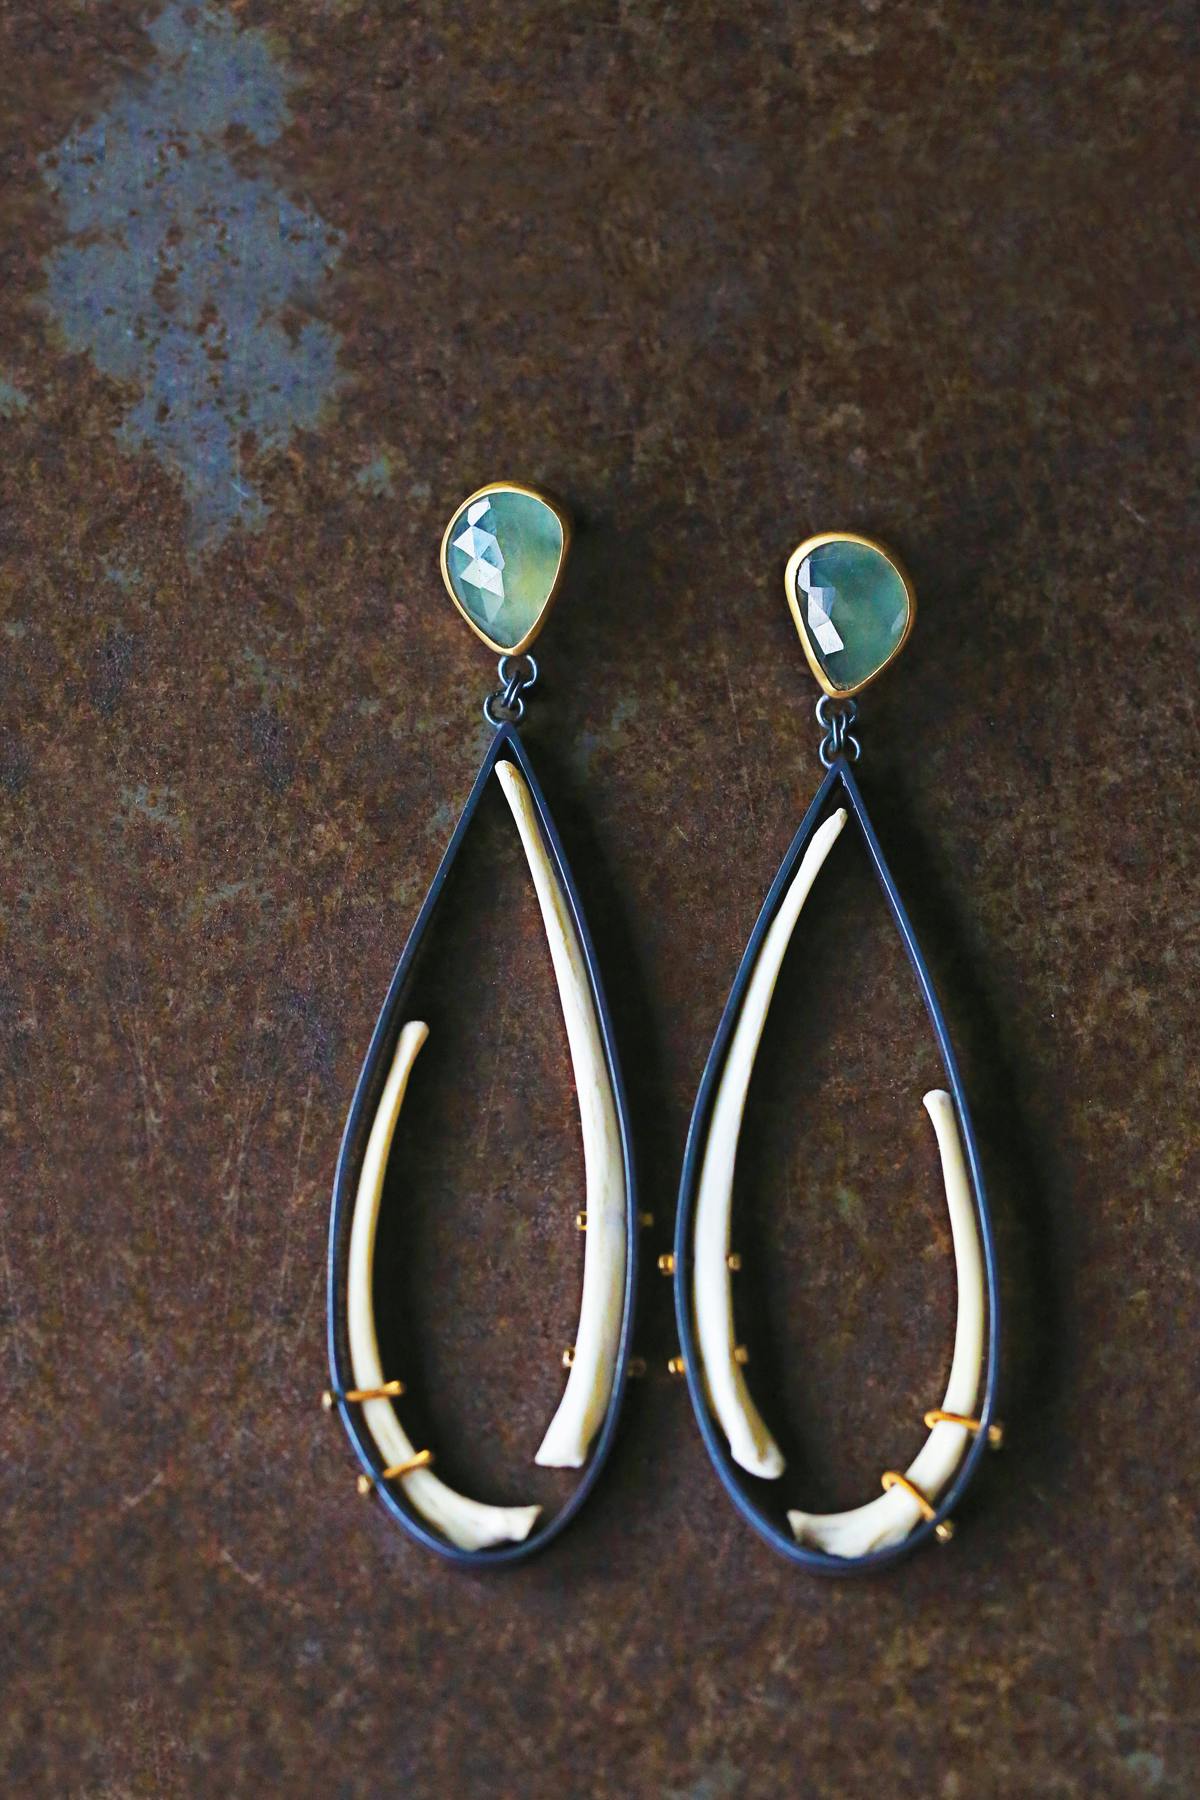 pair of tear dropped shaped earrings with teal jems and animal bones